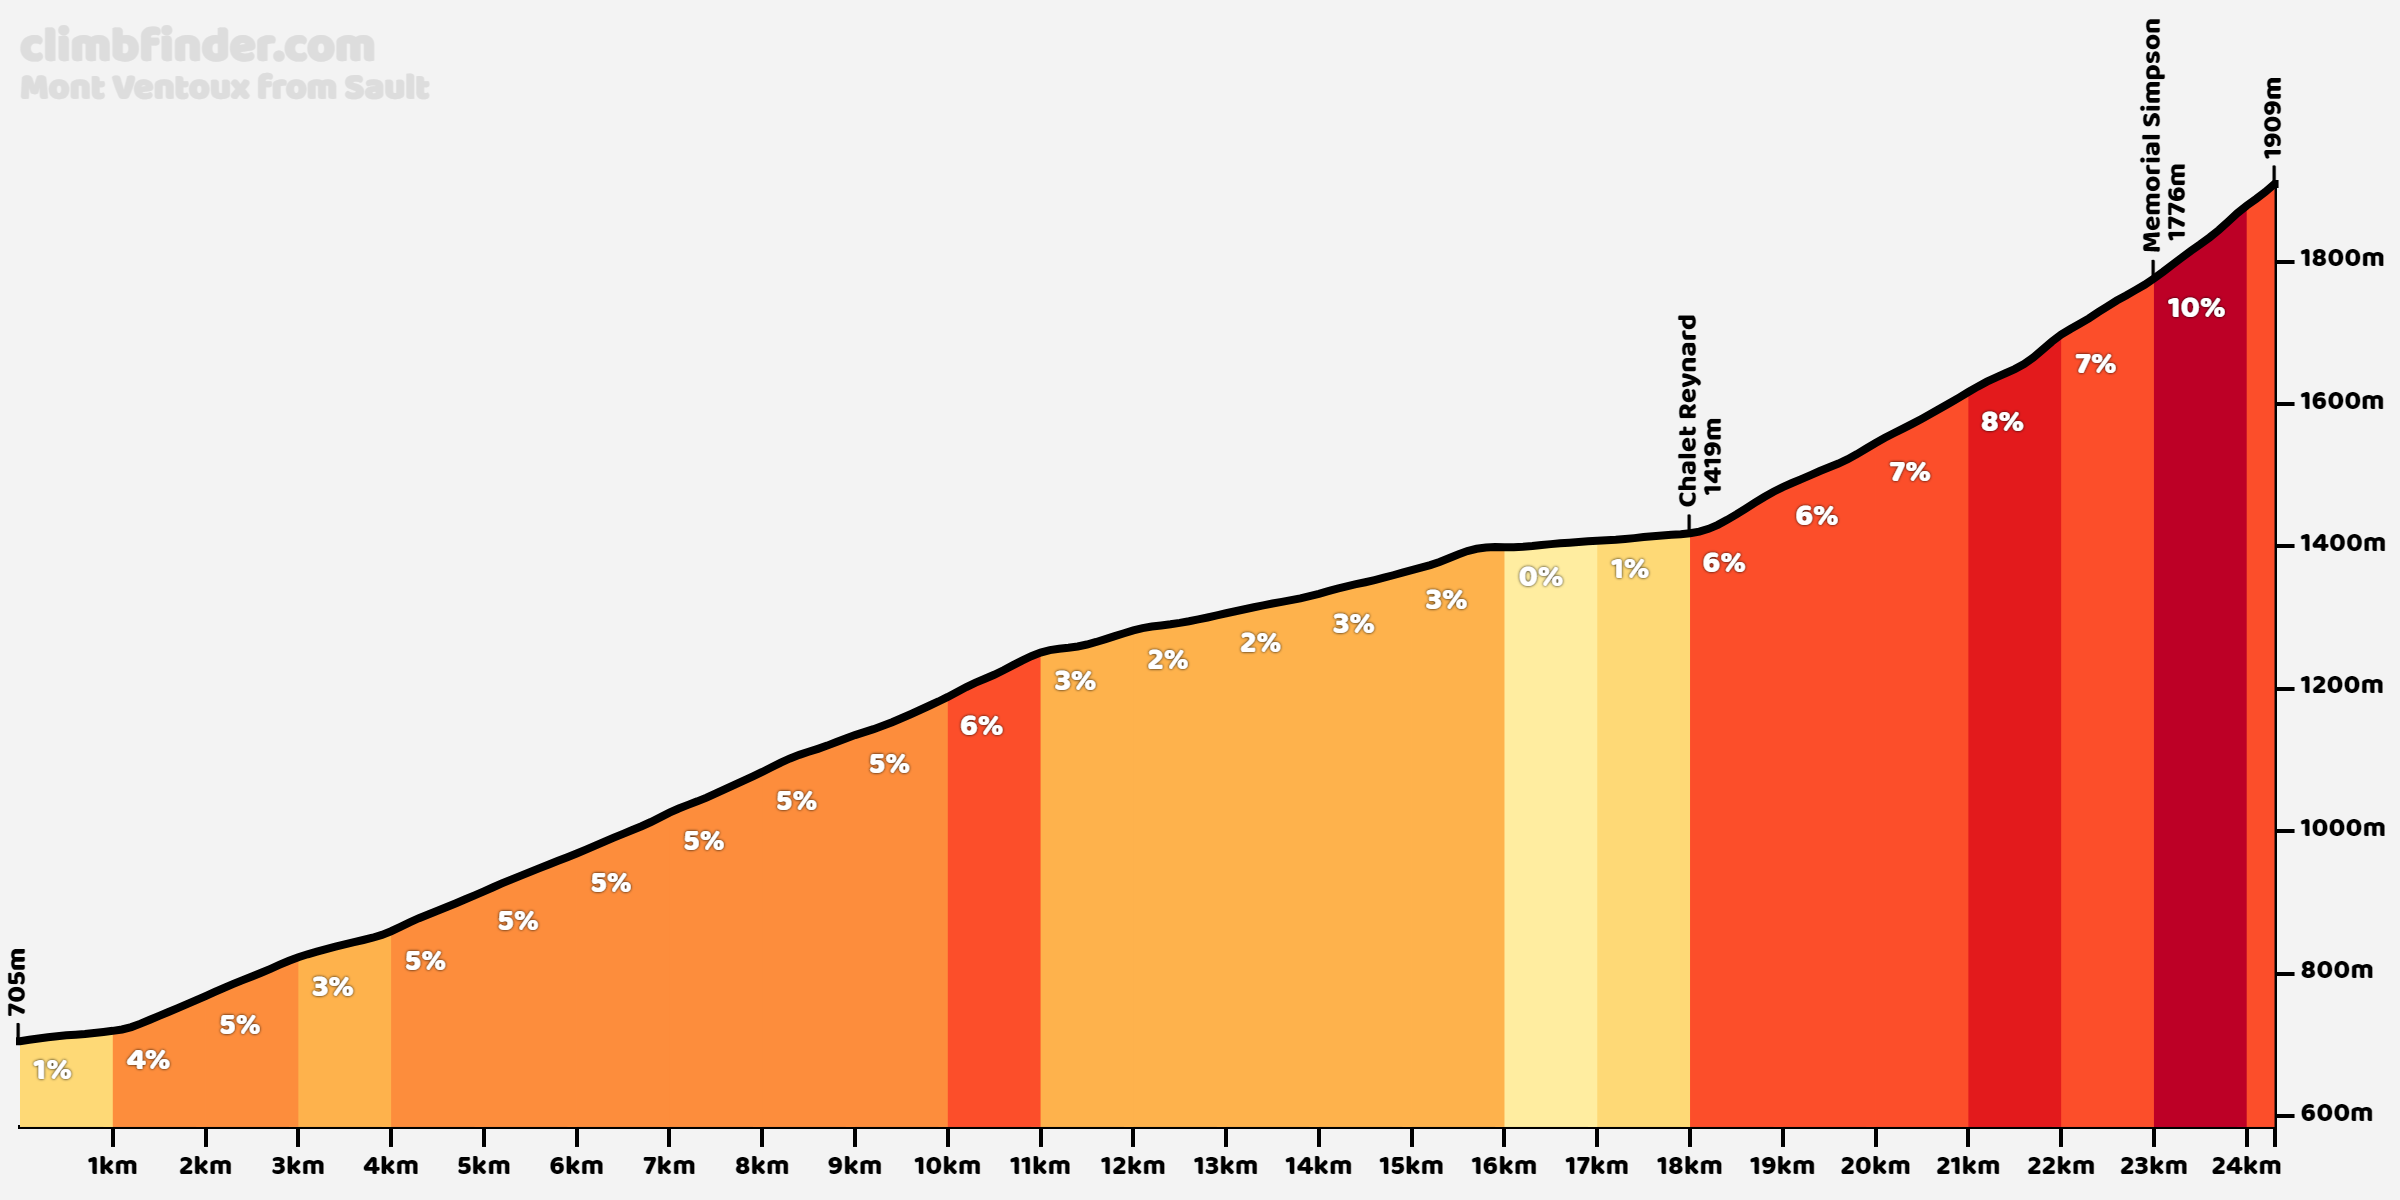 Mont Ventoux from Sault - Profile of the ascent